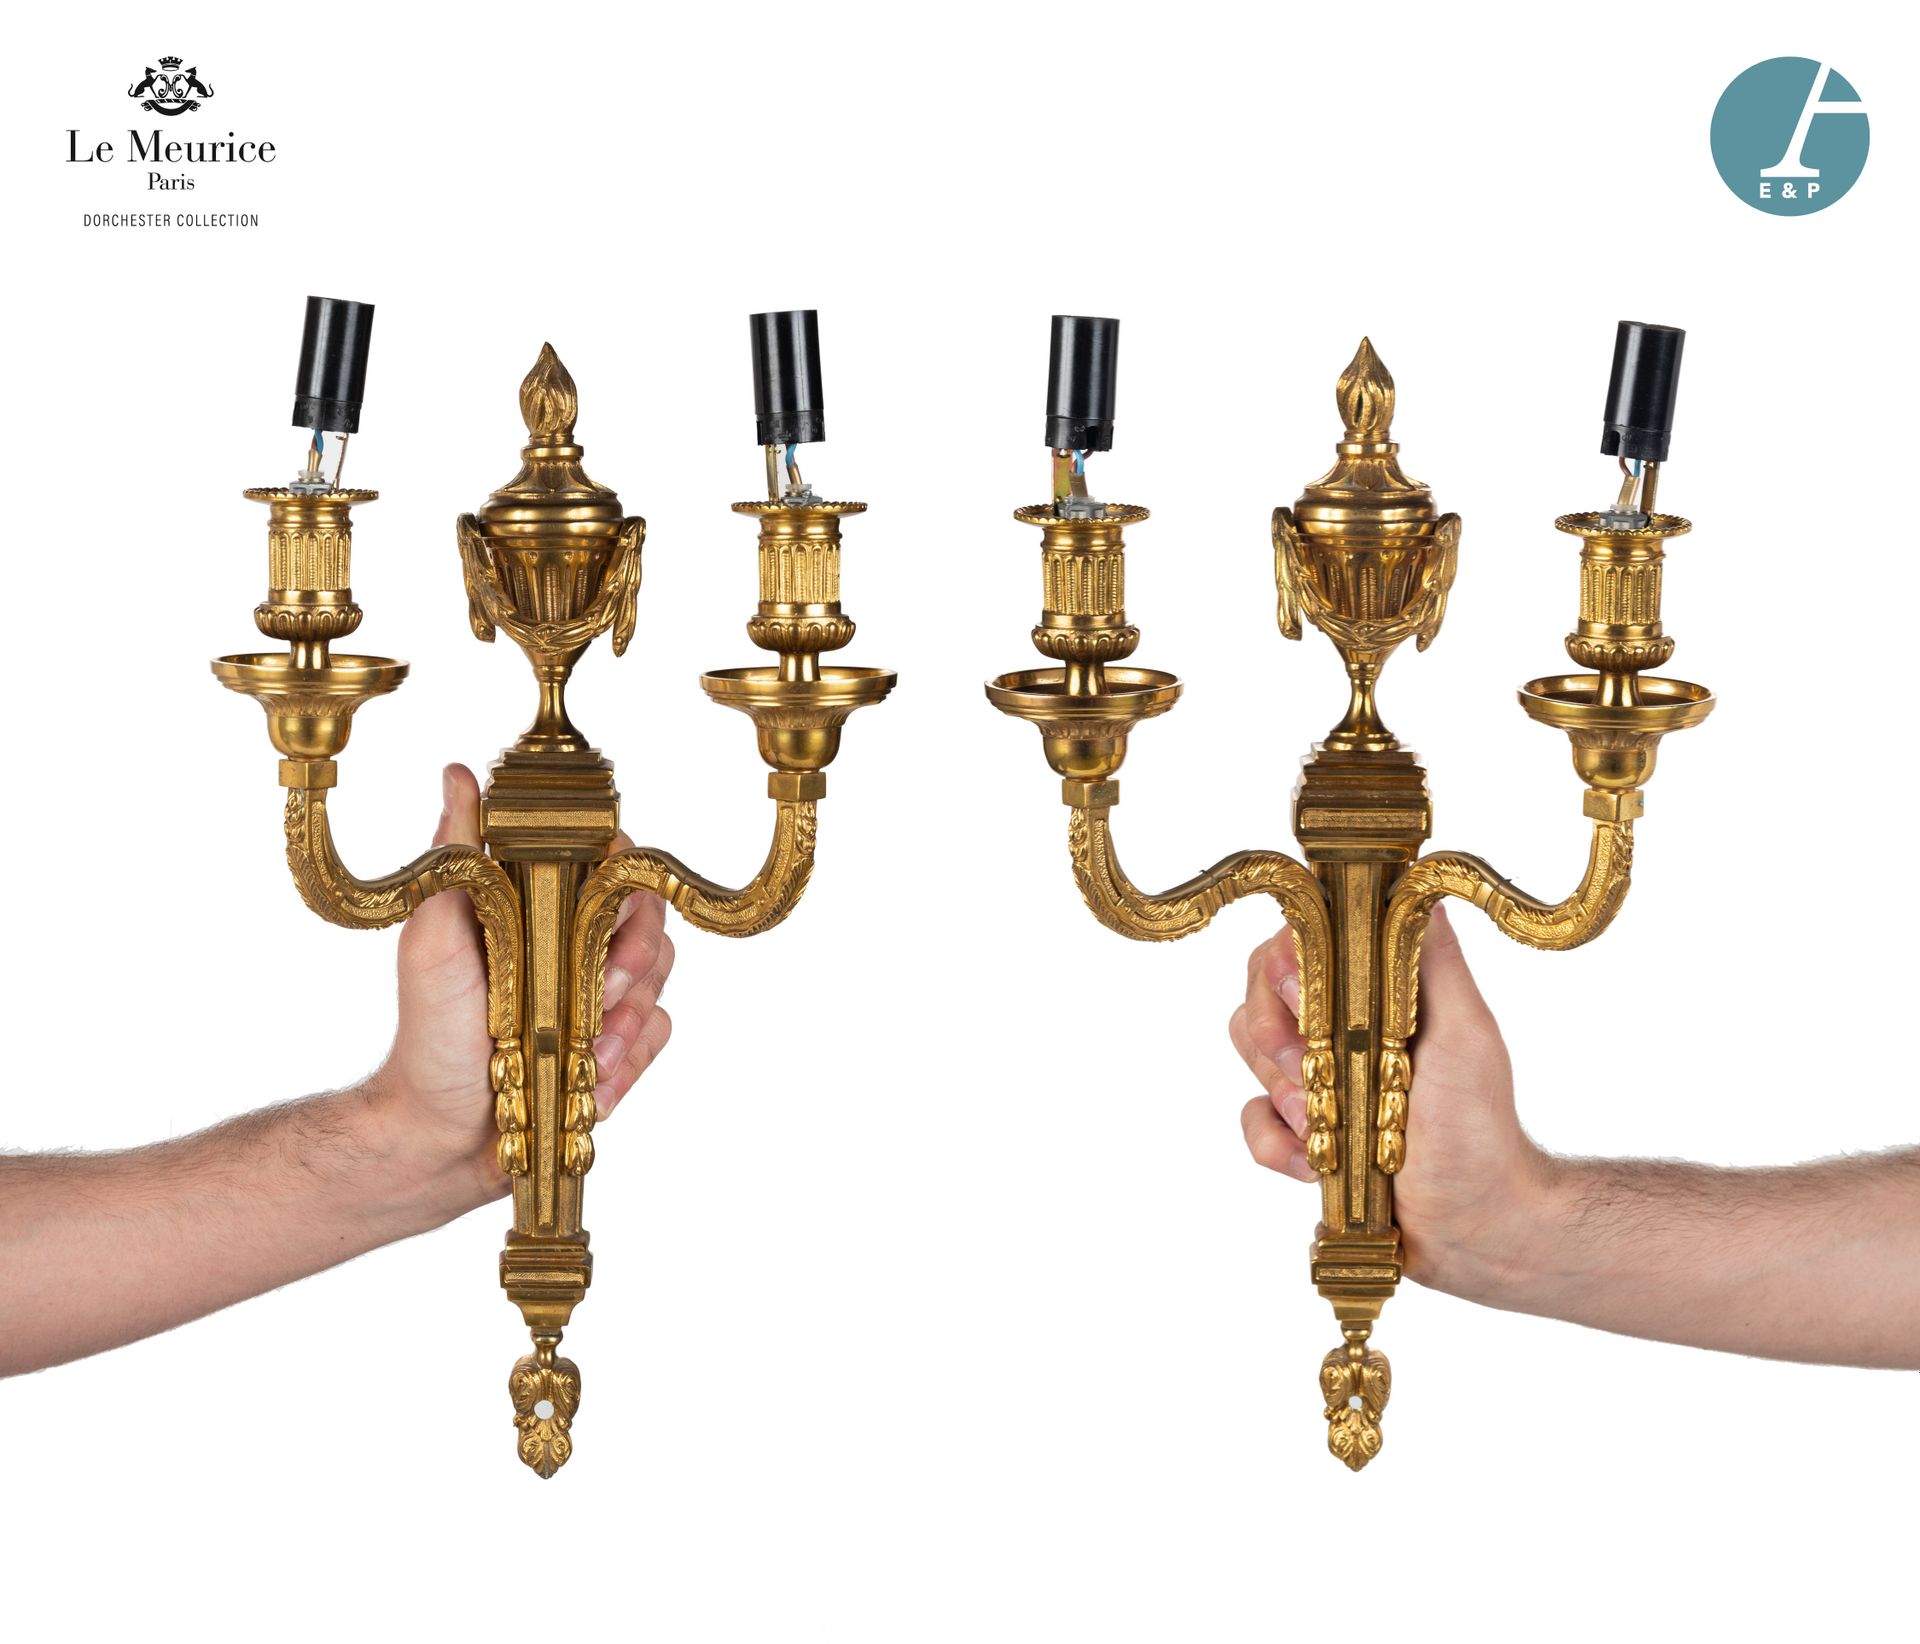 Null From the Hôtel Le Meurice.
Pair of two-arm sconces in chased and gilded bro&hellip;